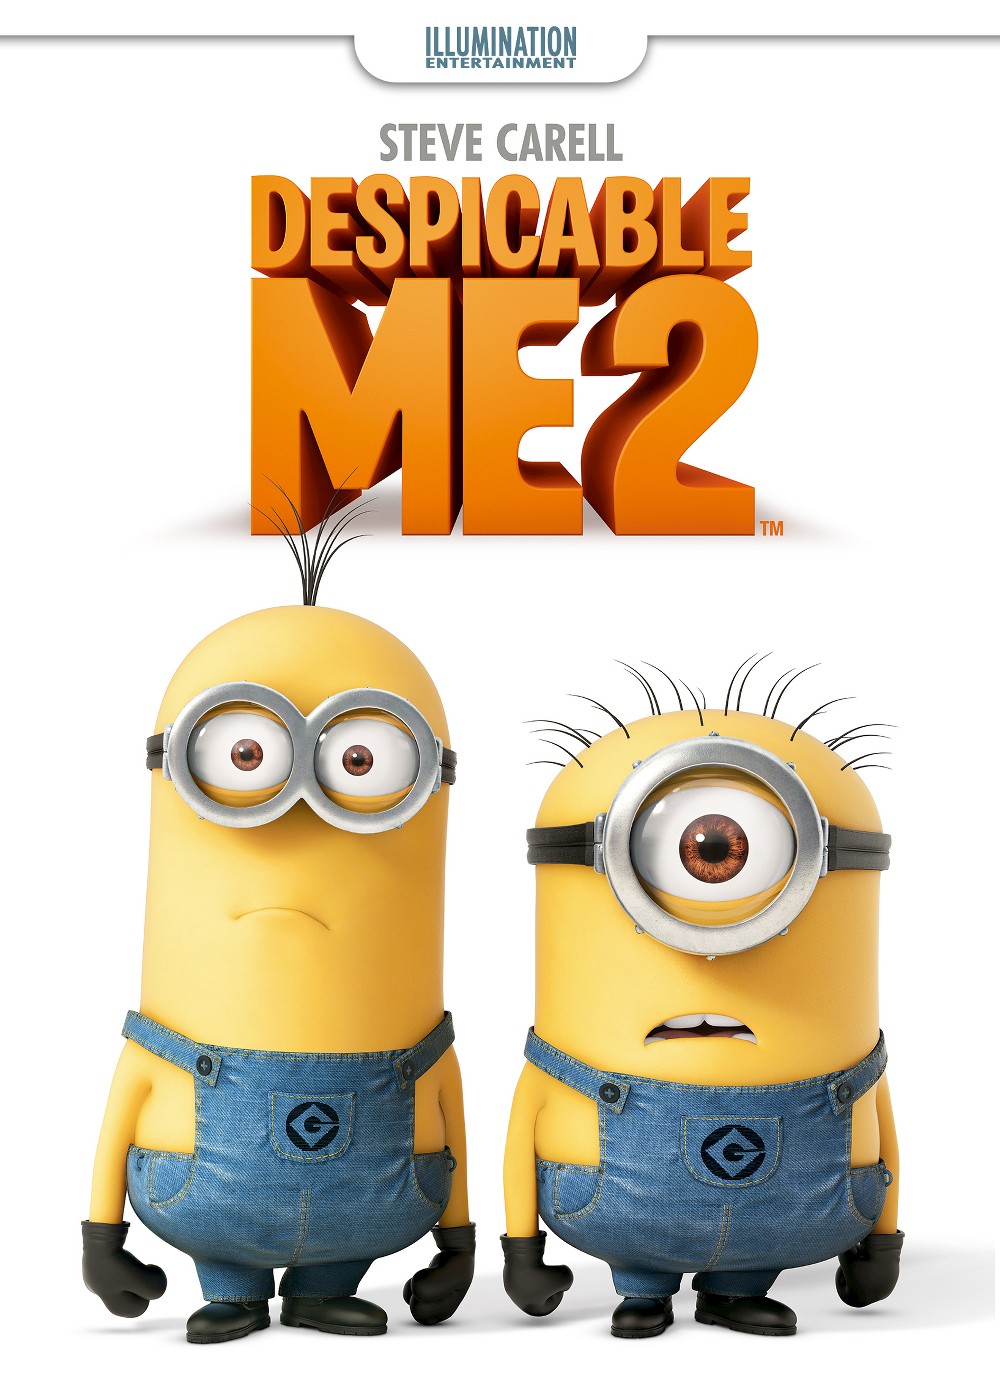 Despicable Me 2 (DVD), Universal Studios, Kids & Family - image 2 of 3